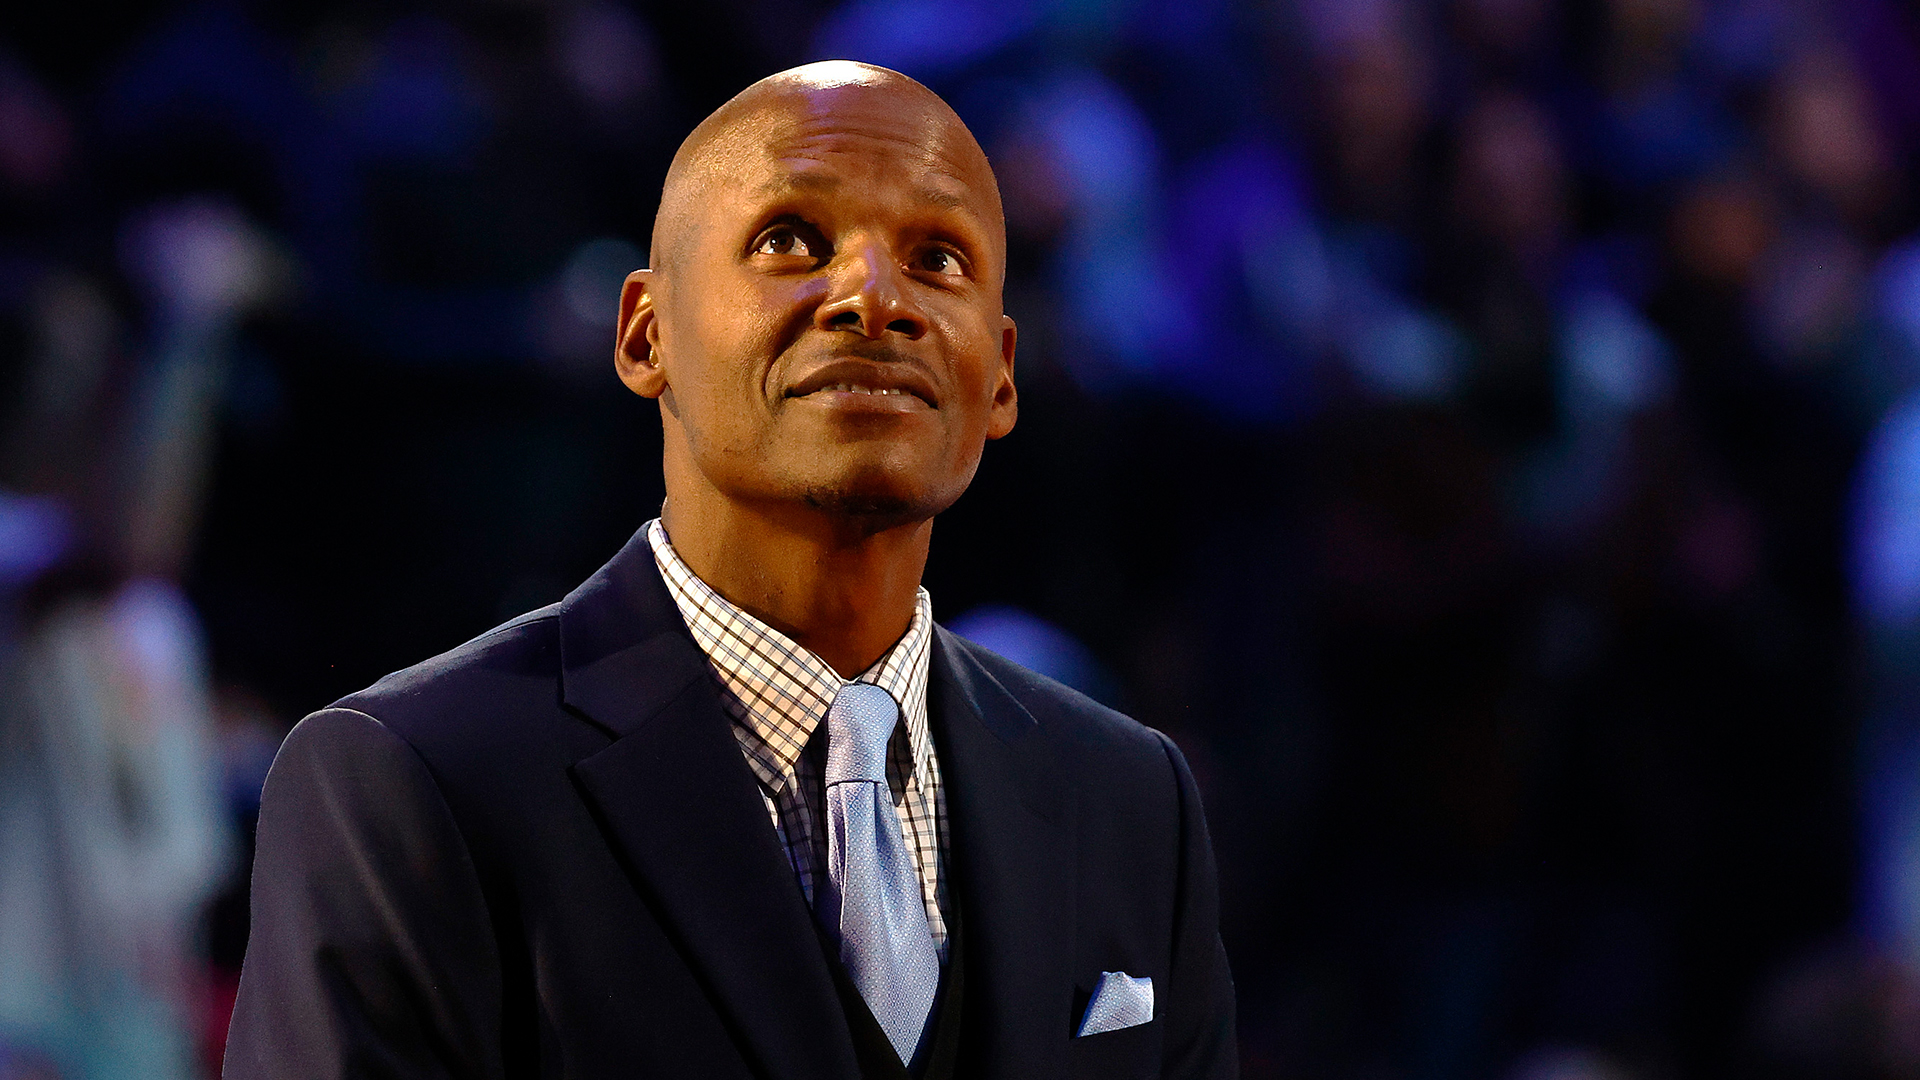 Ray Allen Graduates From University Of Connecticut After Initially Starting His College Career In 1993